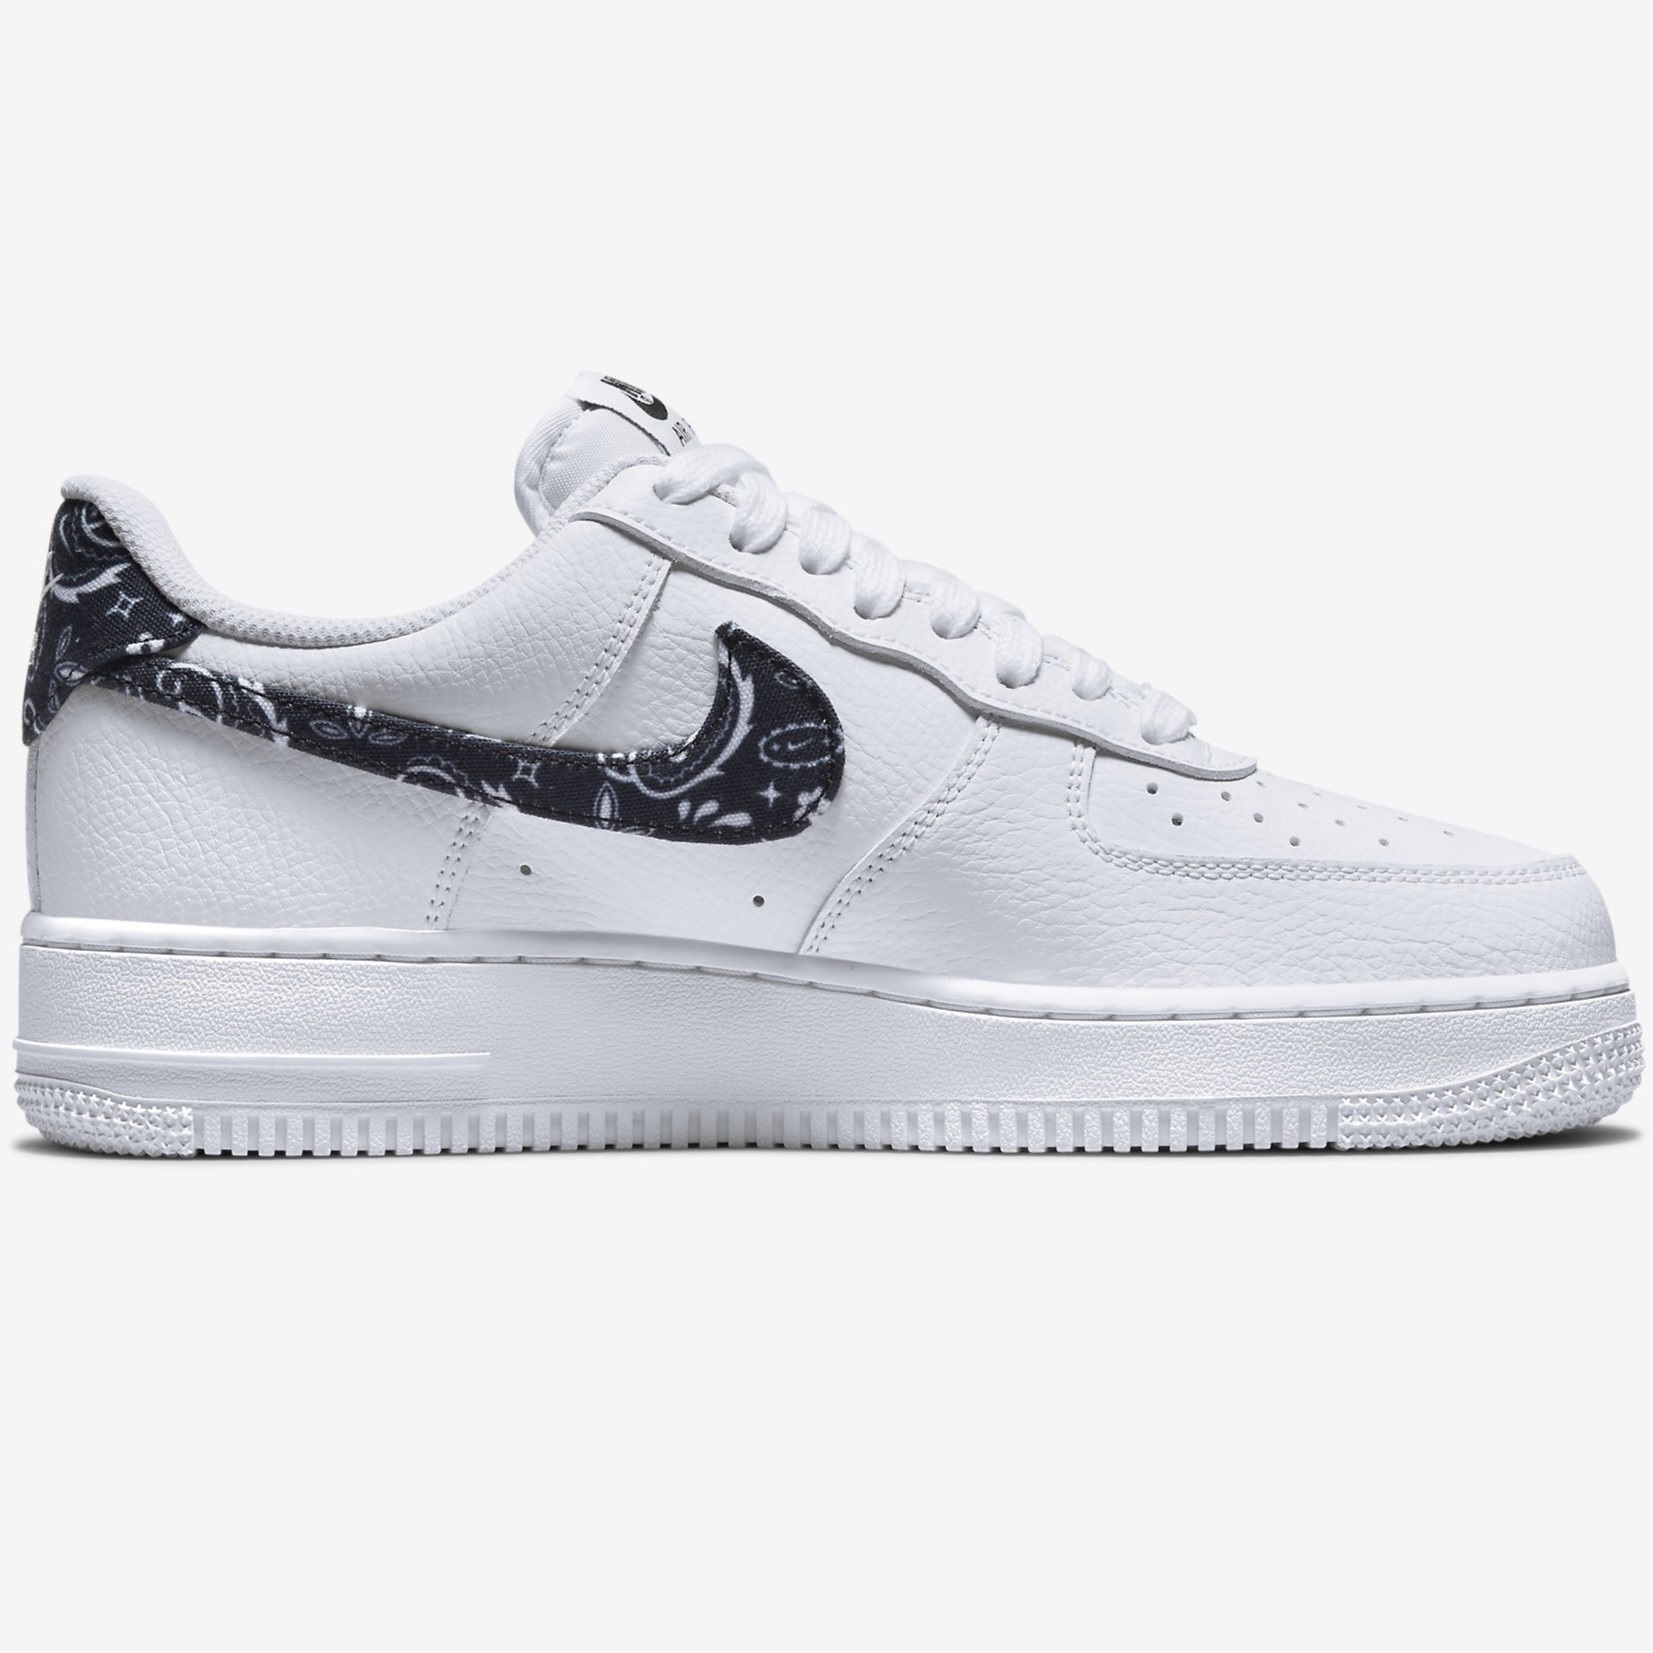 GIÀY THỂ THAO NIKE AIR FORCE 1 LOW 07 ESSENTIALS ´BLACK PAISLEY´ DH4406-101 4